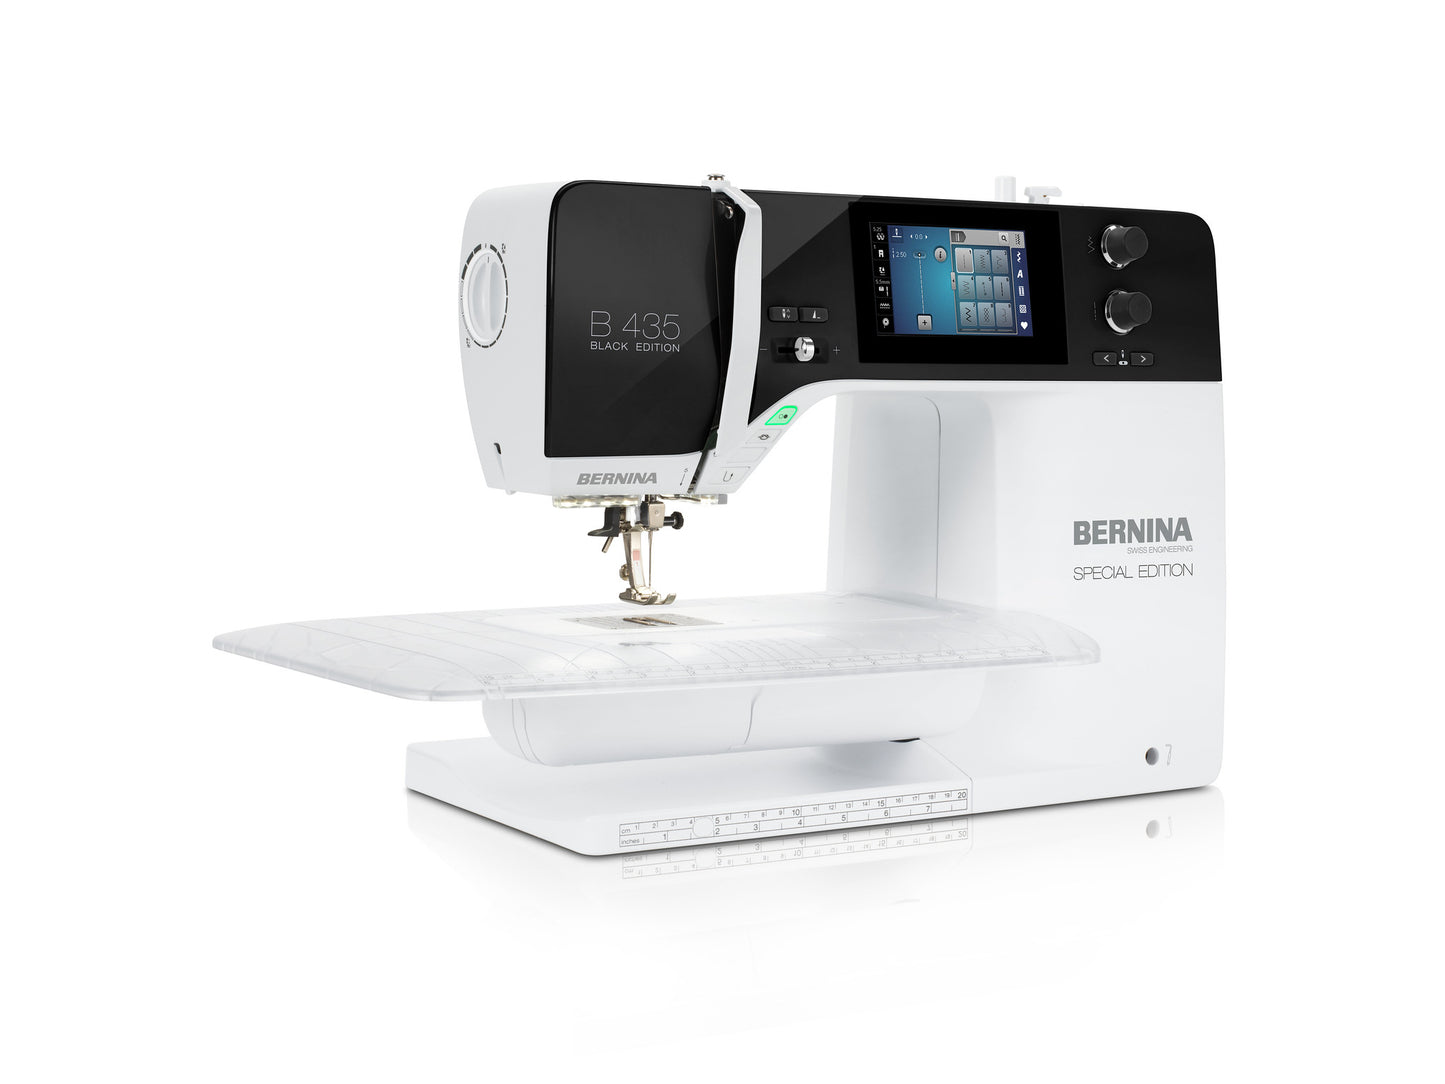 Bernina Special Edition 435 - Now in Stock